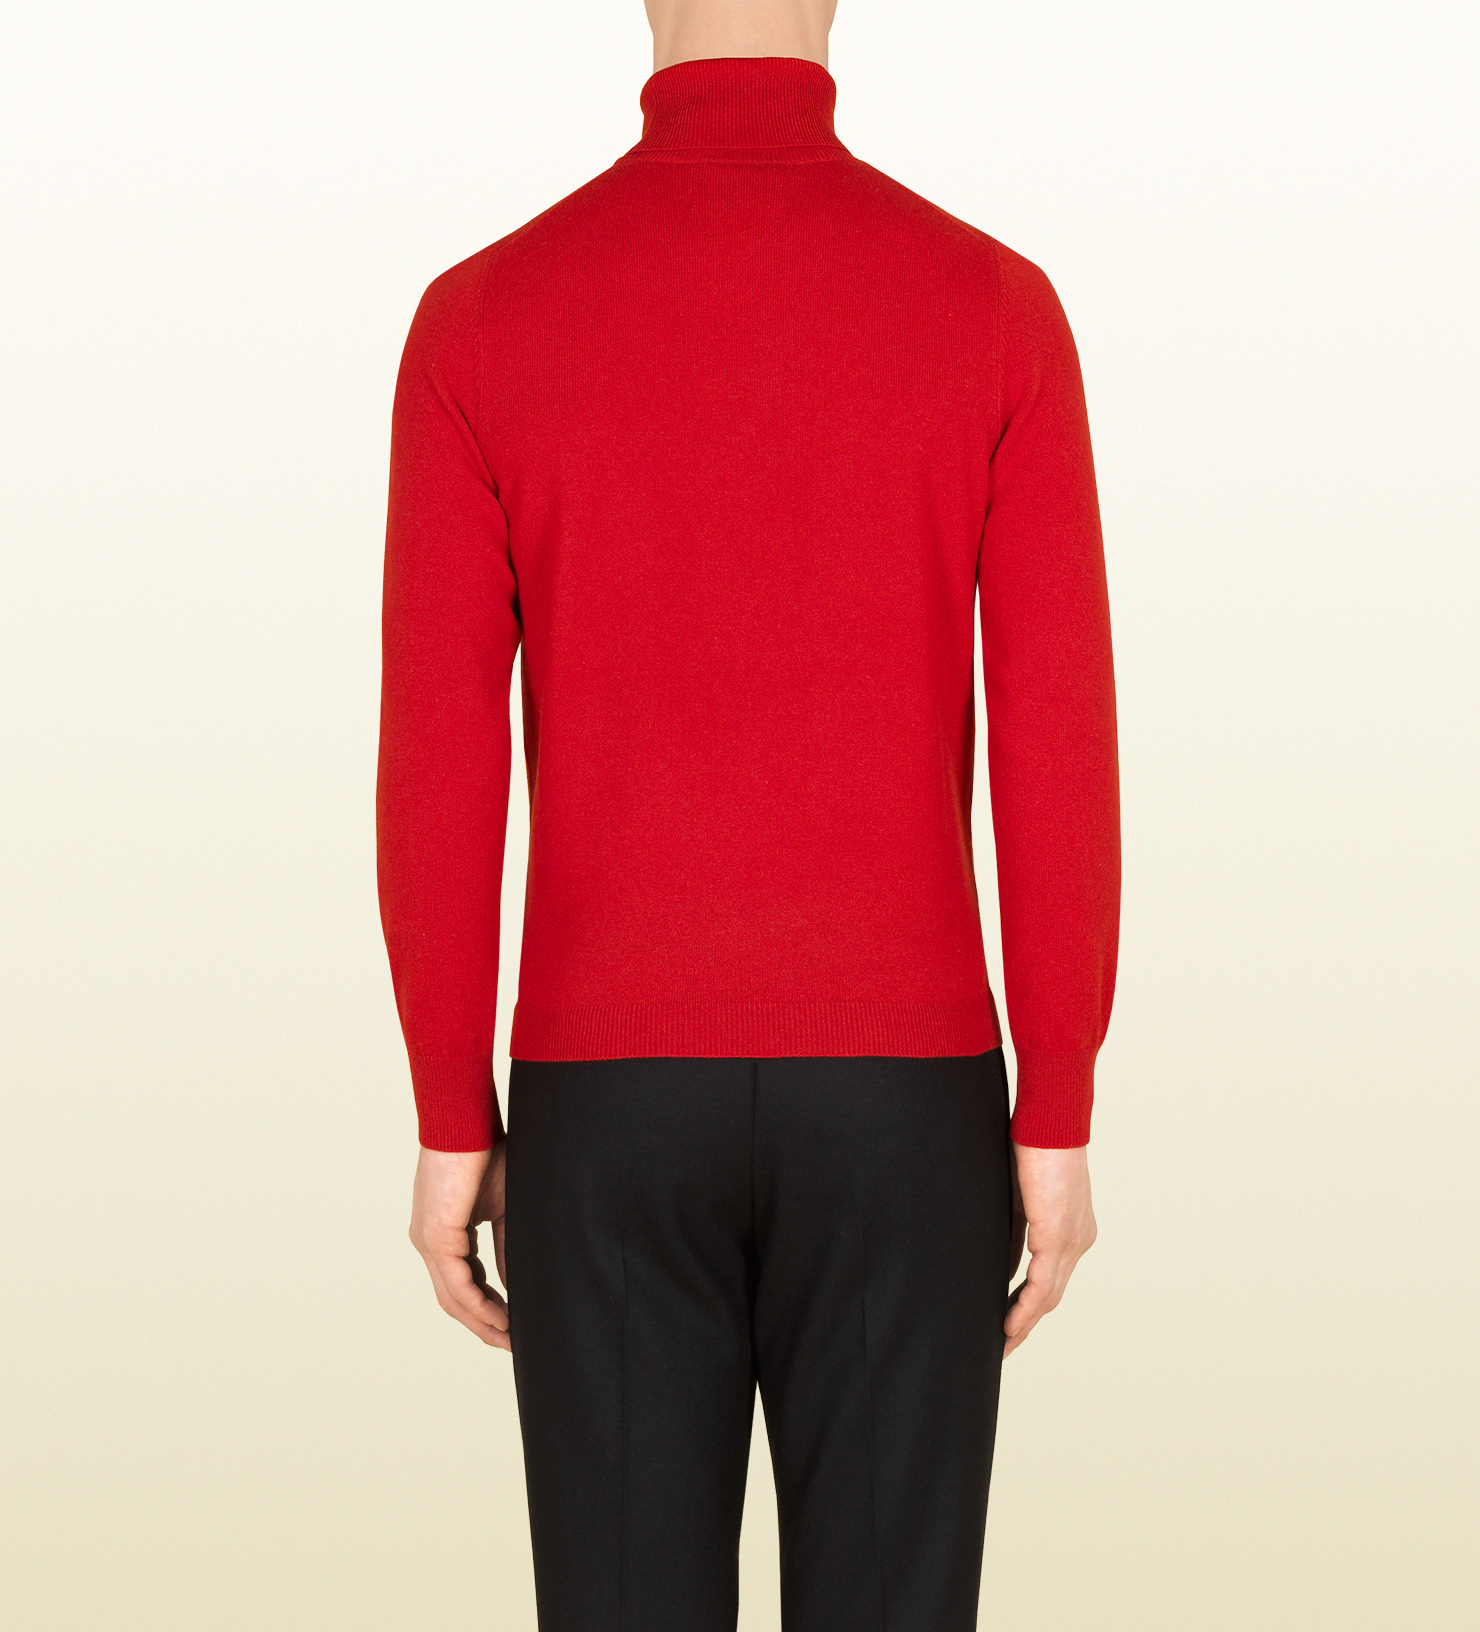 Lyst - Gucci Cashmere Turtleneck in Red for Men